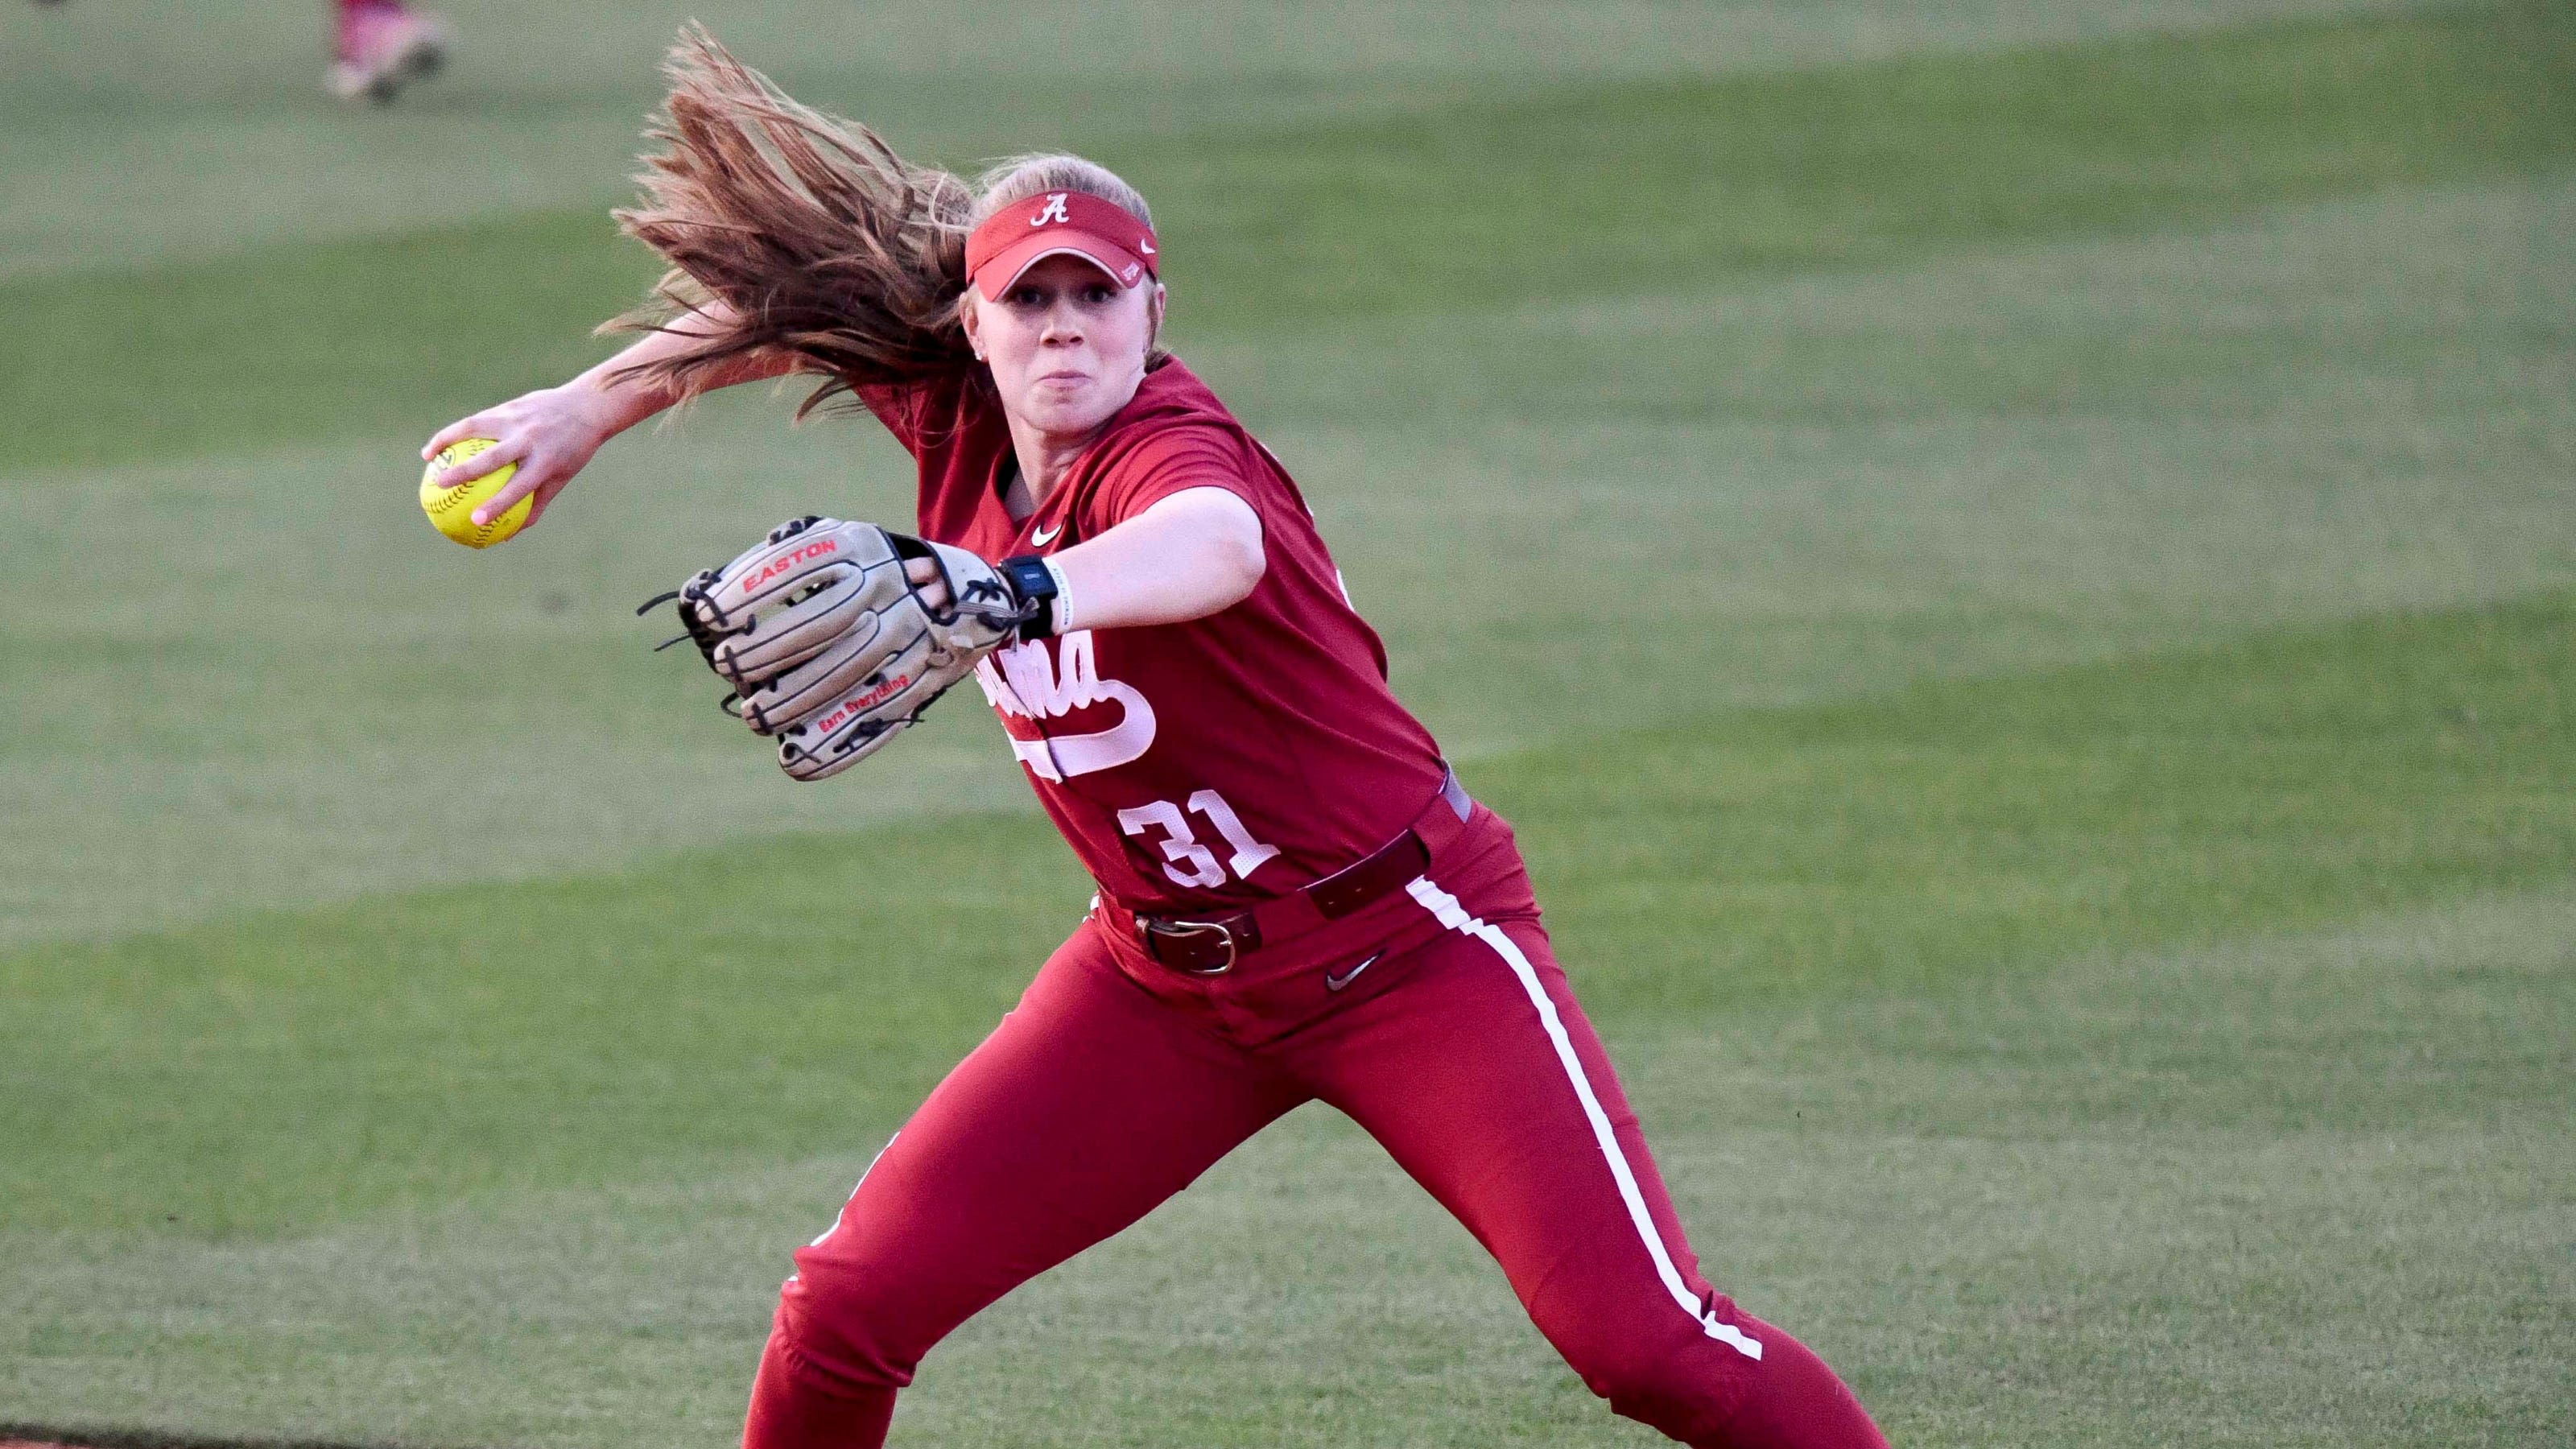 Alabama softball starting shortstop Kenleigh Cahalan enters transfer portal after two years with Crimson Tide